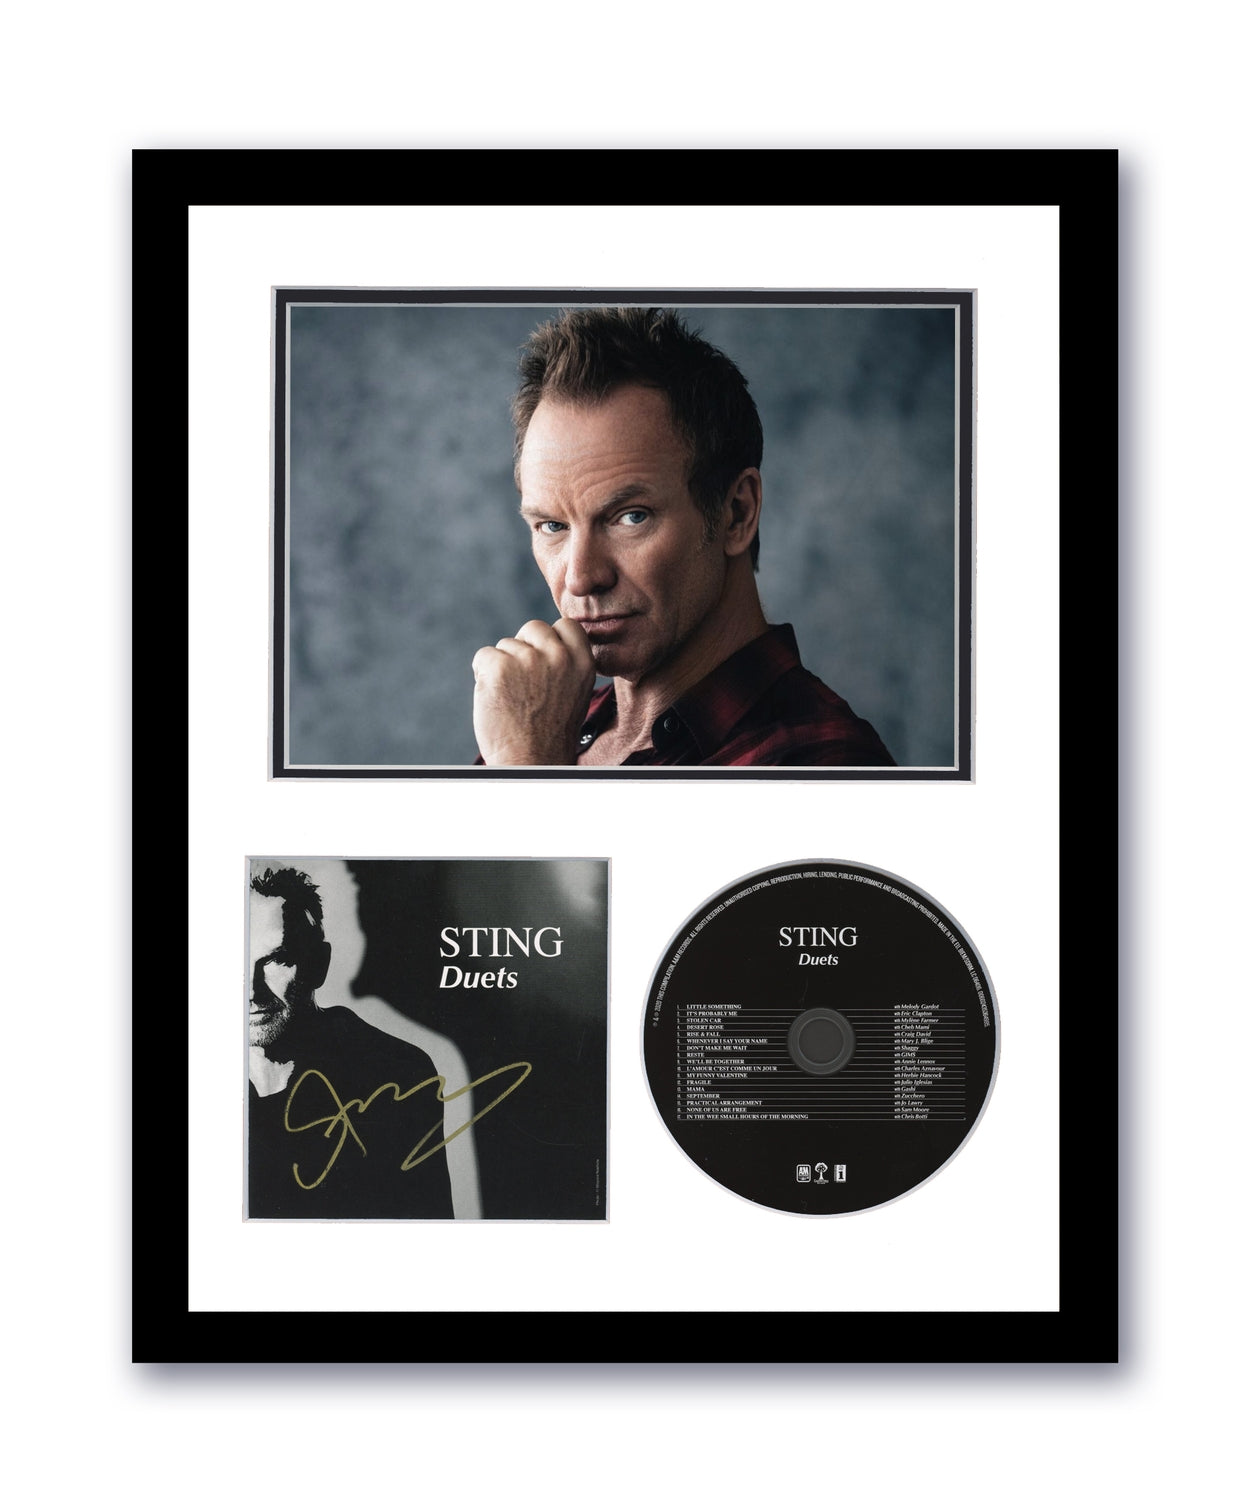 Sting Autographed Signed 11x14 Framed CD Photo Duets The Police ACOA 4